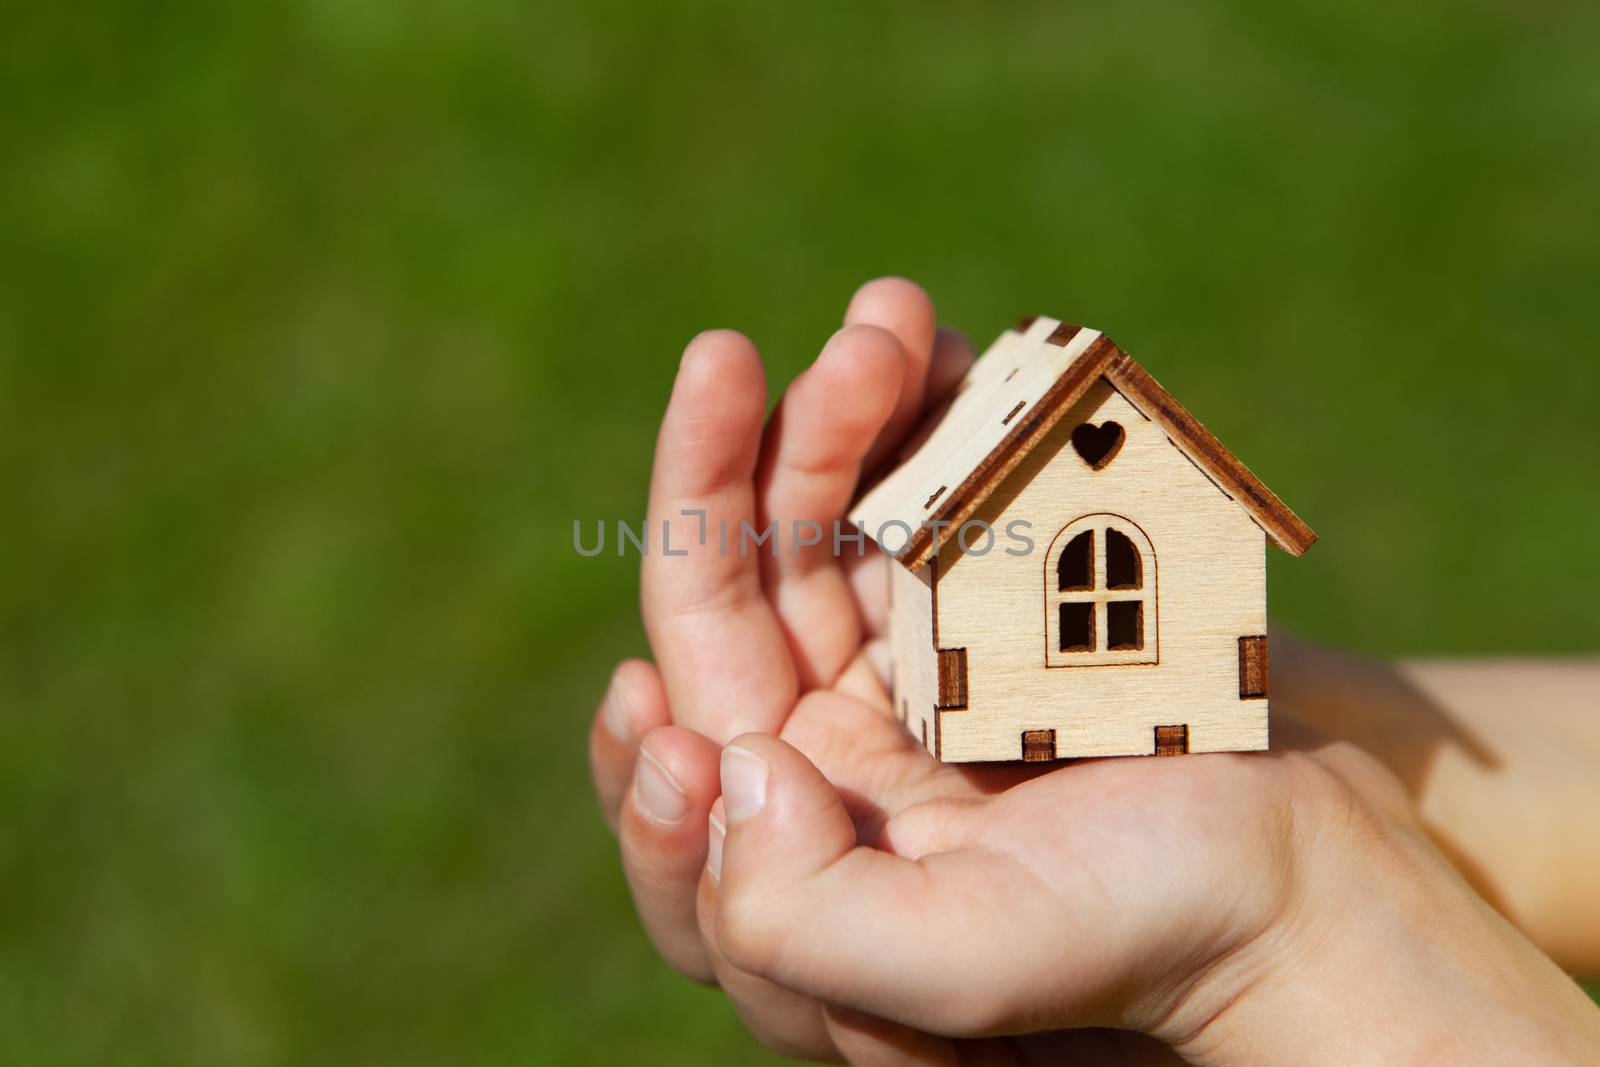 Small toy house in hands of child on green grass background. Concept mortgage, dream house, real estate acquisition. In frame only hands, without face . Soft selective focus. Close-up. Copy space.